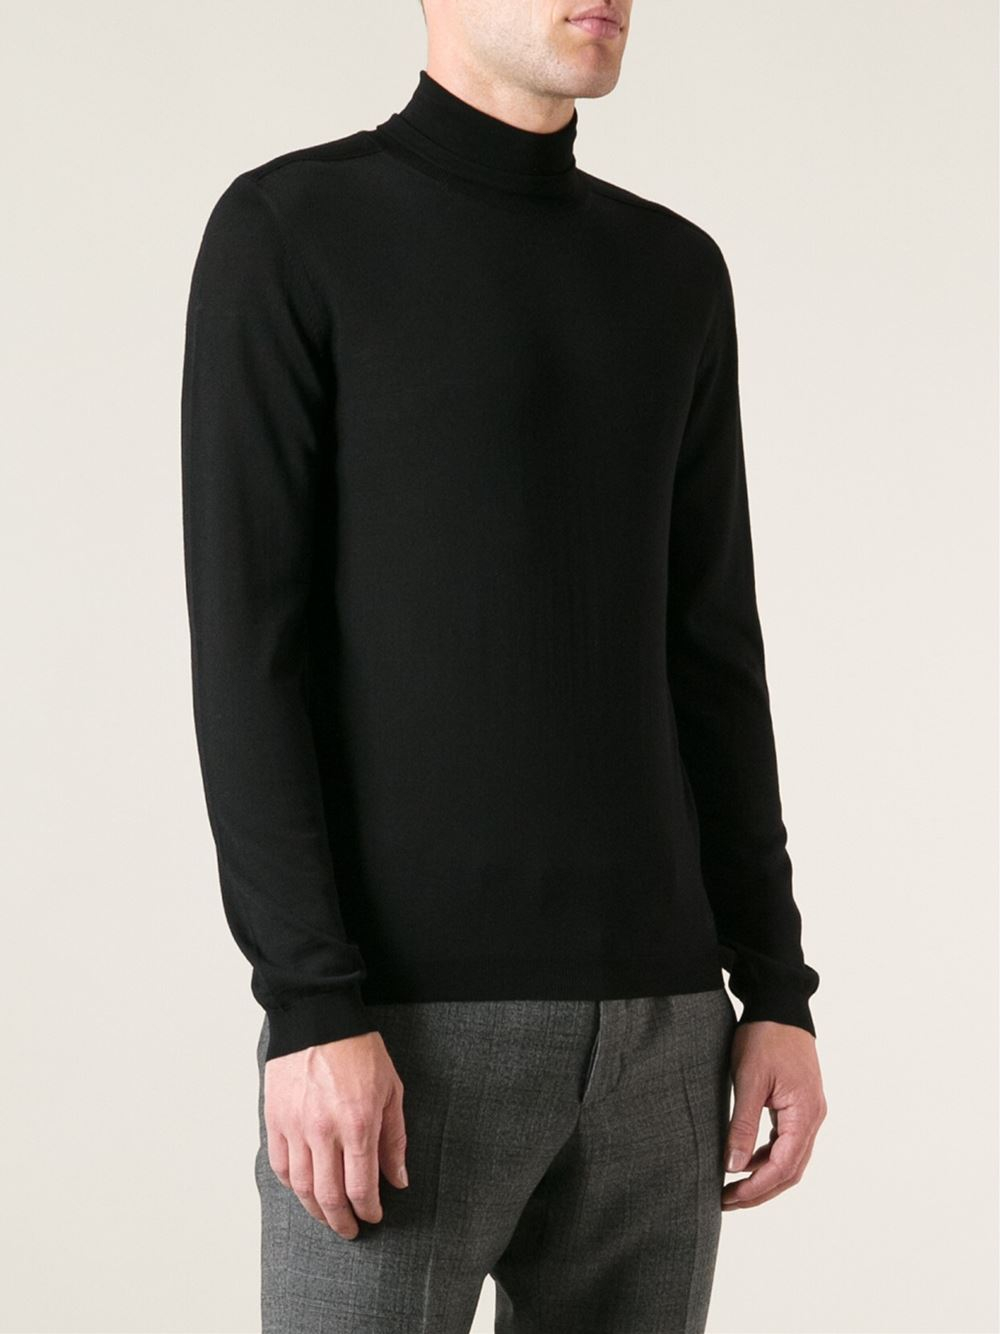 Lyst - Gucci Turtle Neck Sweater in Black for Men